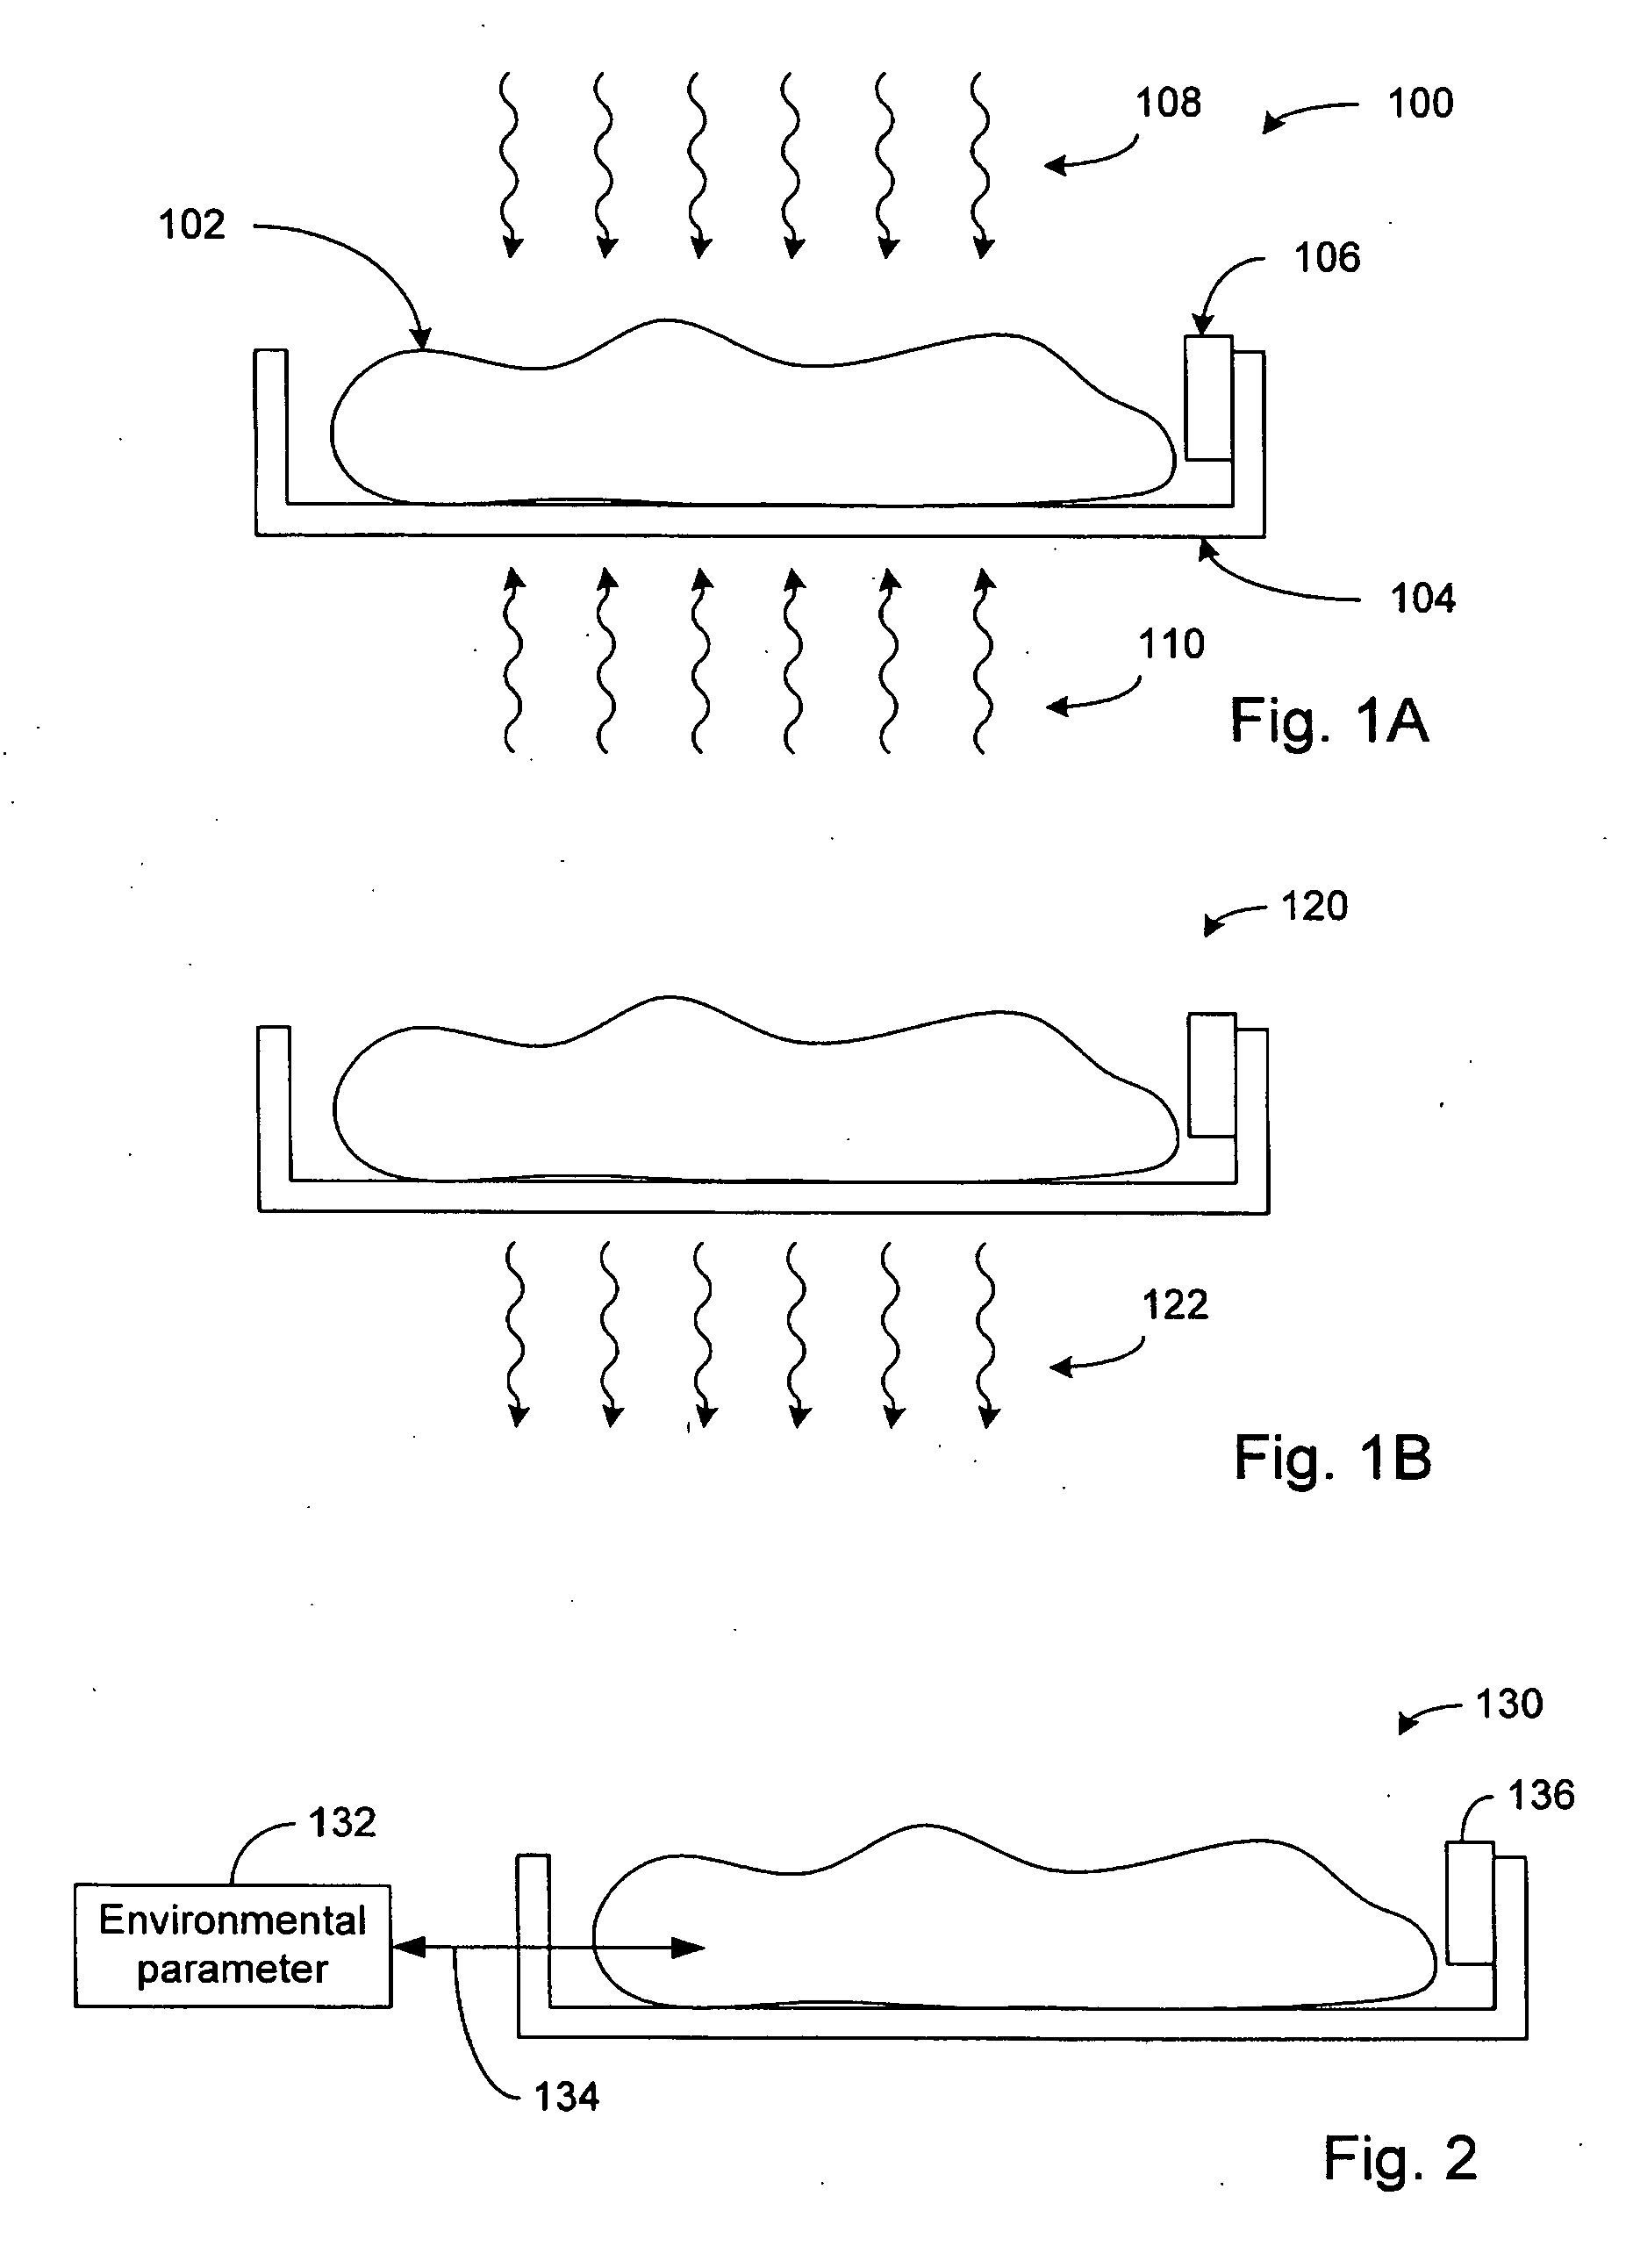 System and method for monitoring food